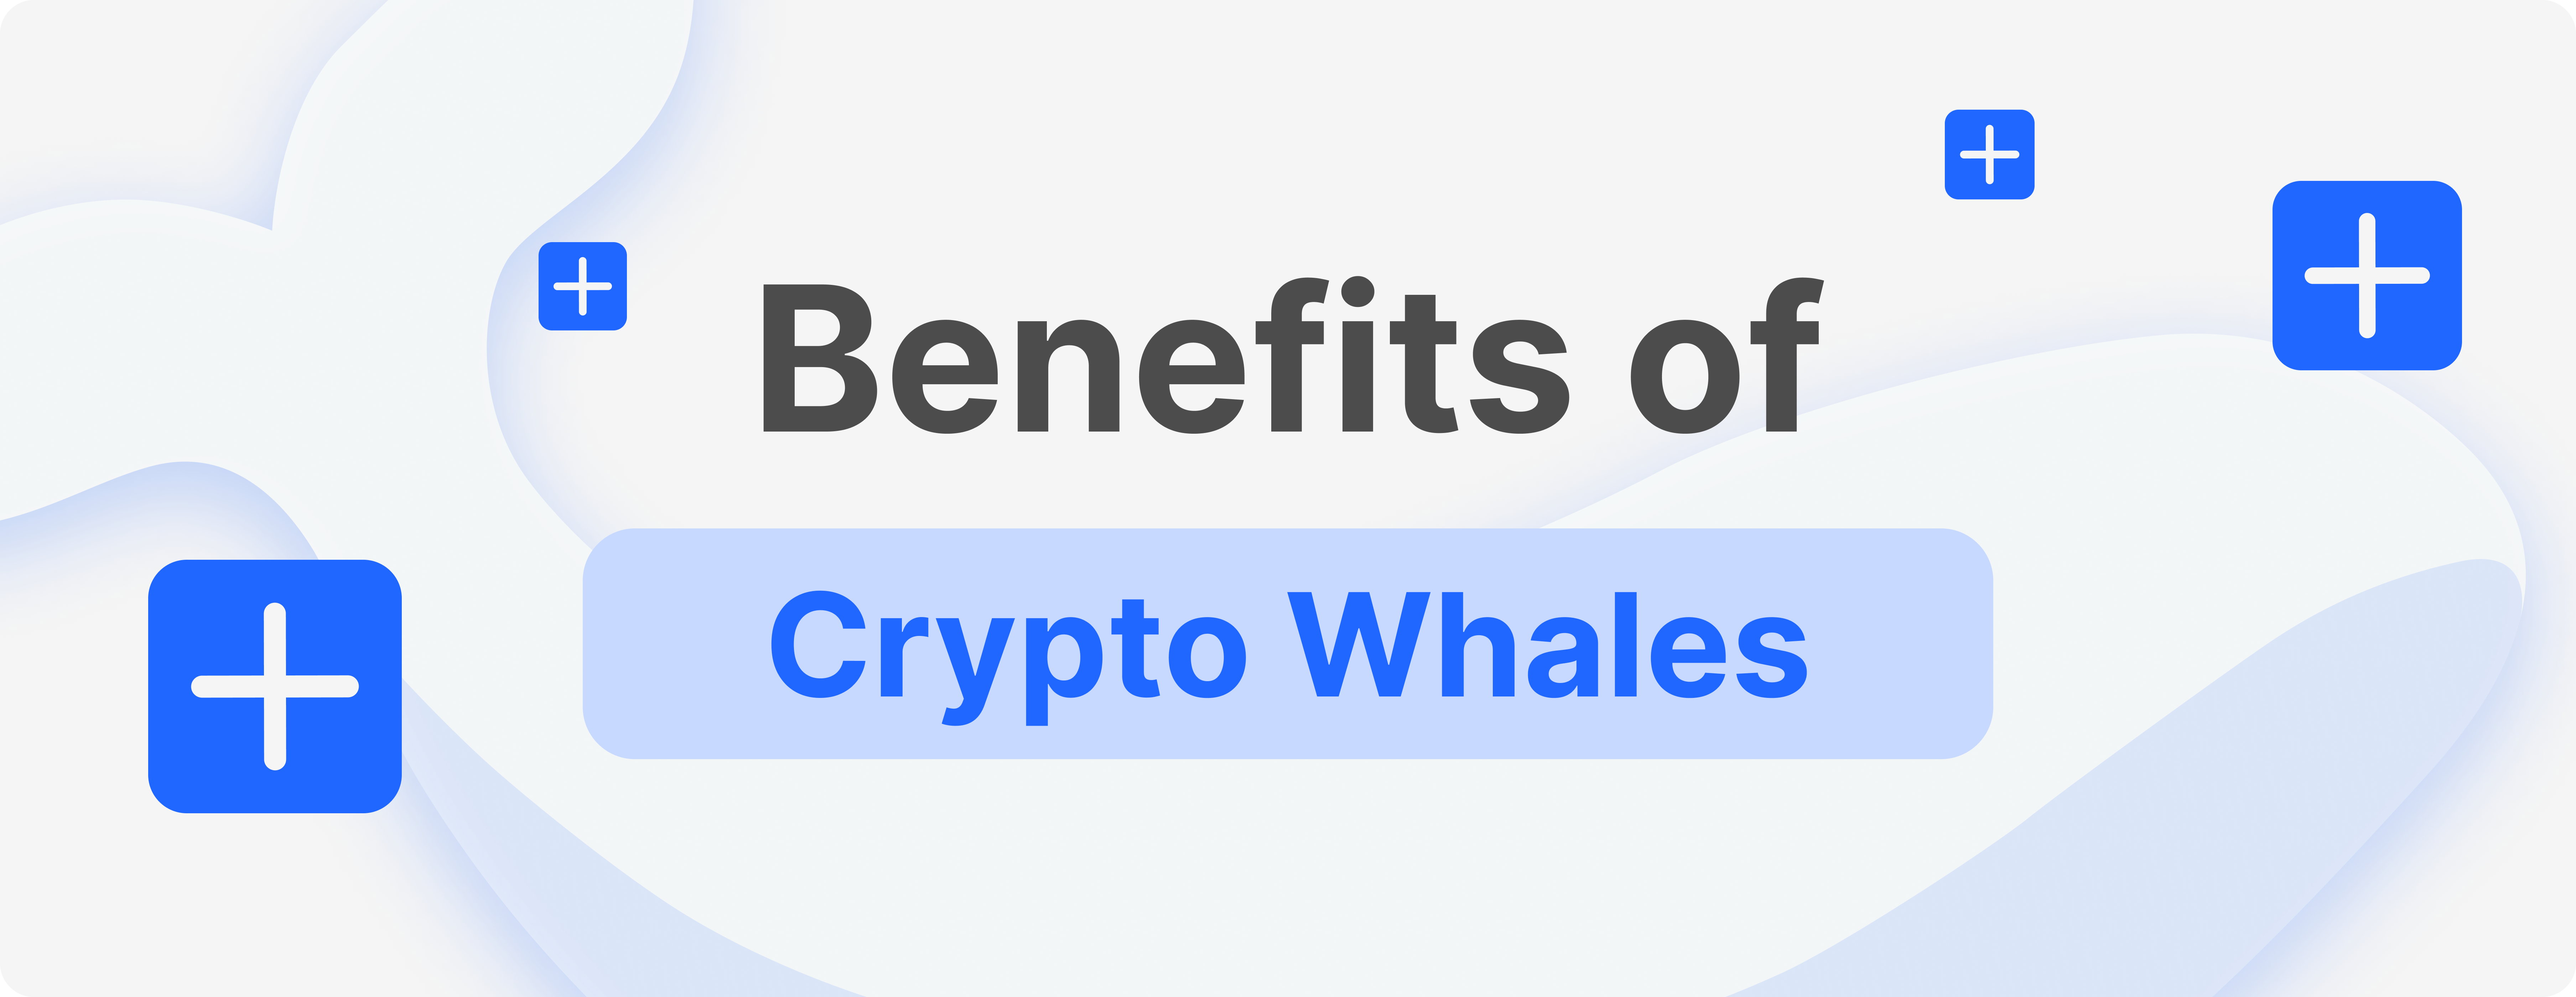 Benefits of Crypto Whales